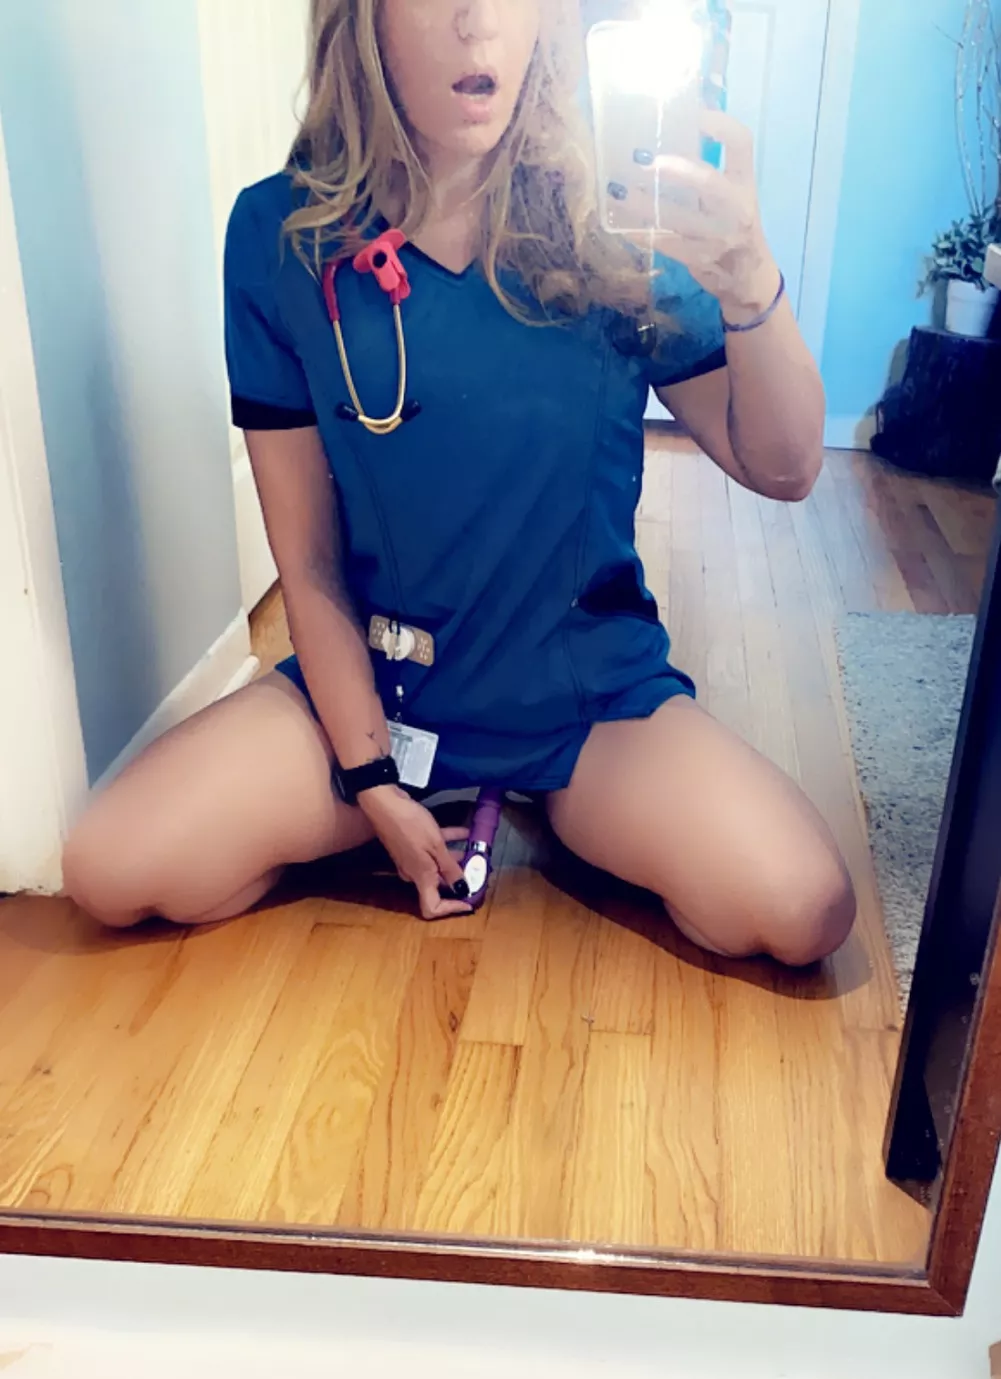 Do you like nurses cumming in their scrubs? Then follow me! nudes cgrey1433 NUDE-PICS picture